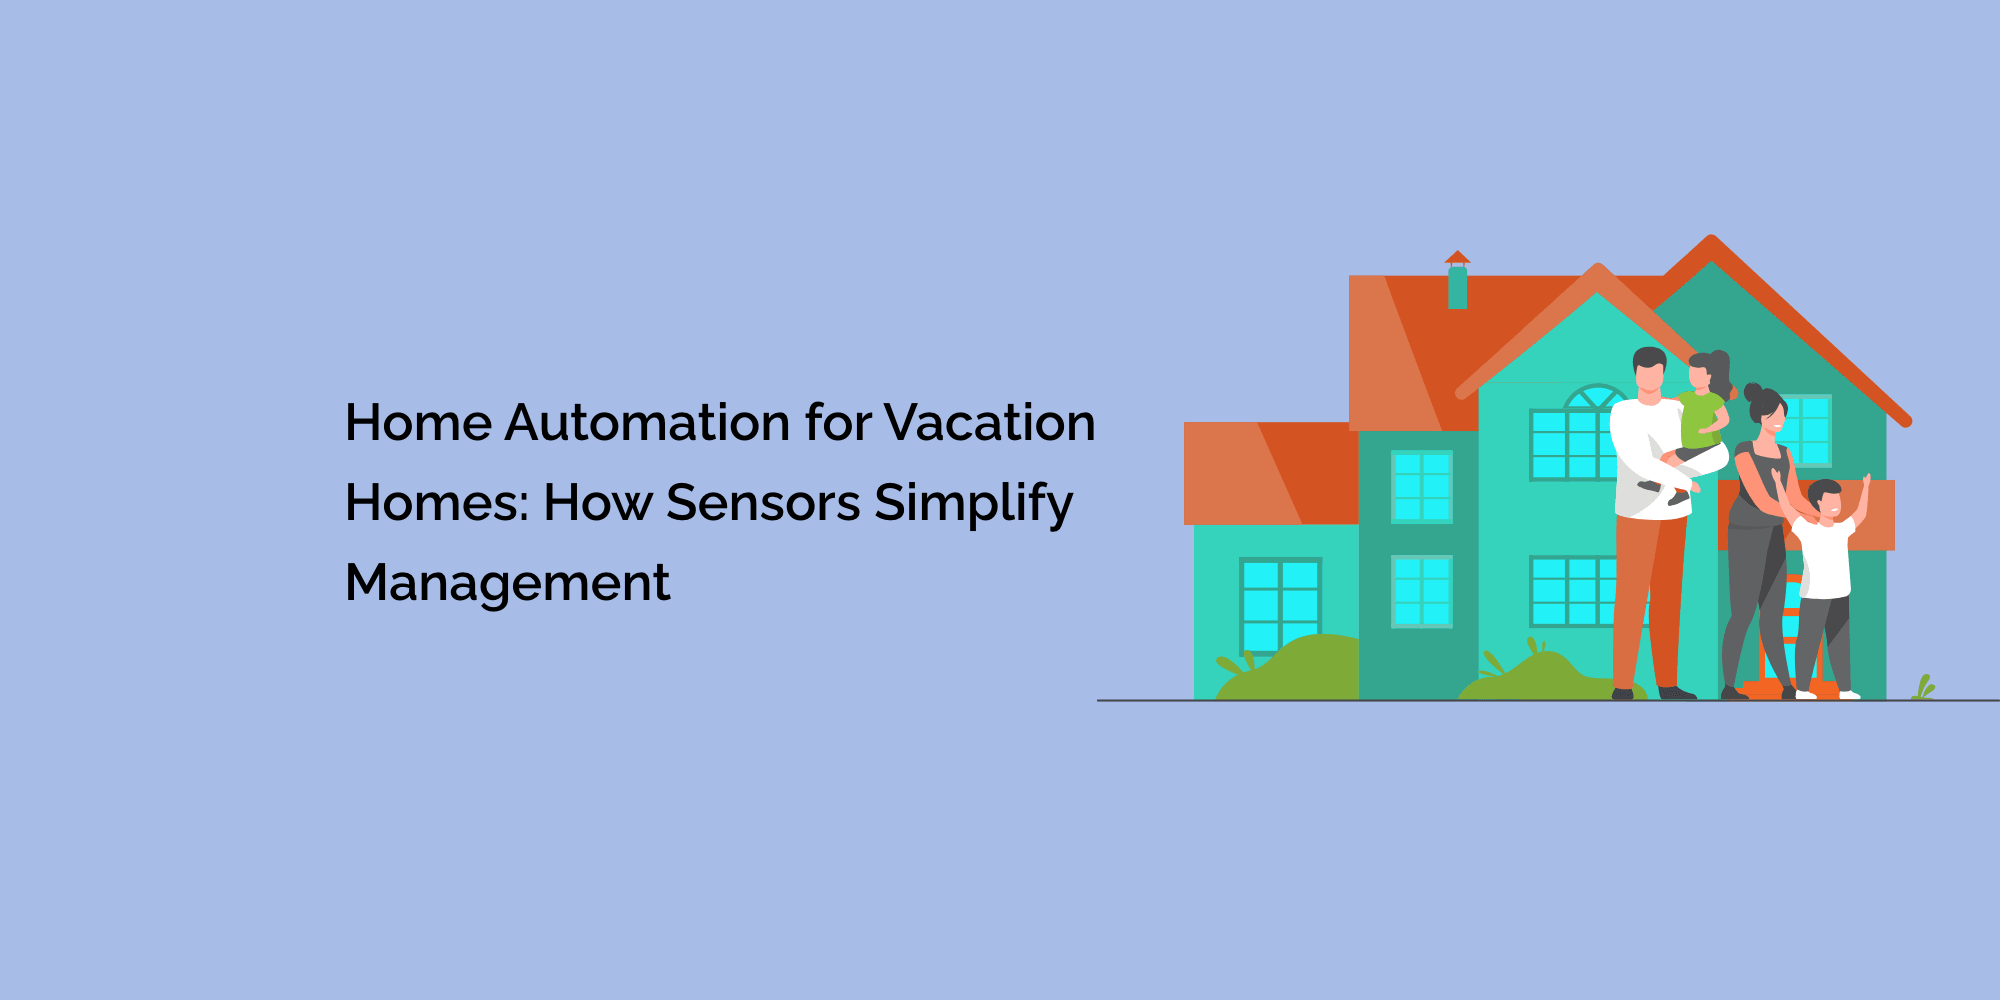 Home Automation for Vacation Homes: How Sensors Simplify Management